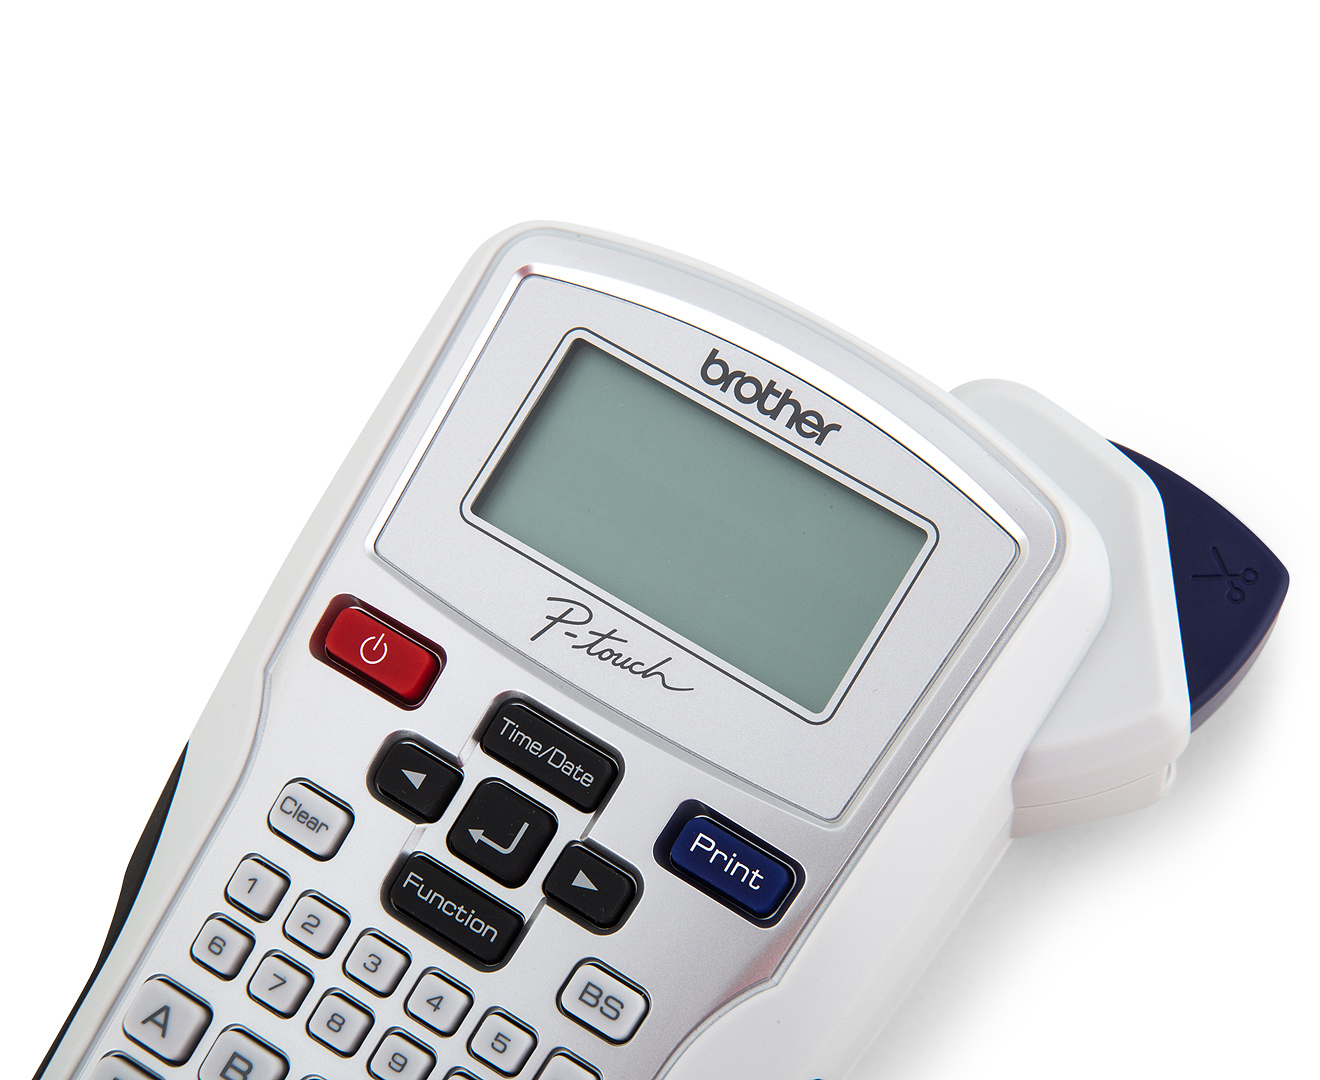 P-touch Brother Label Maker Manual Pt-1010